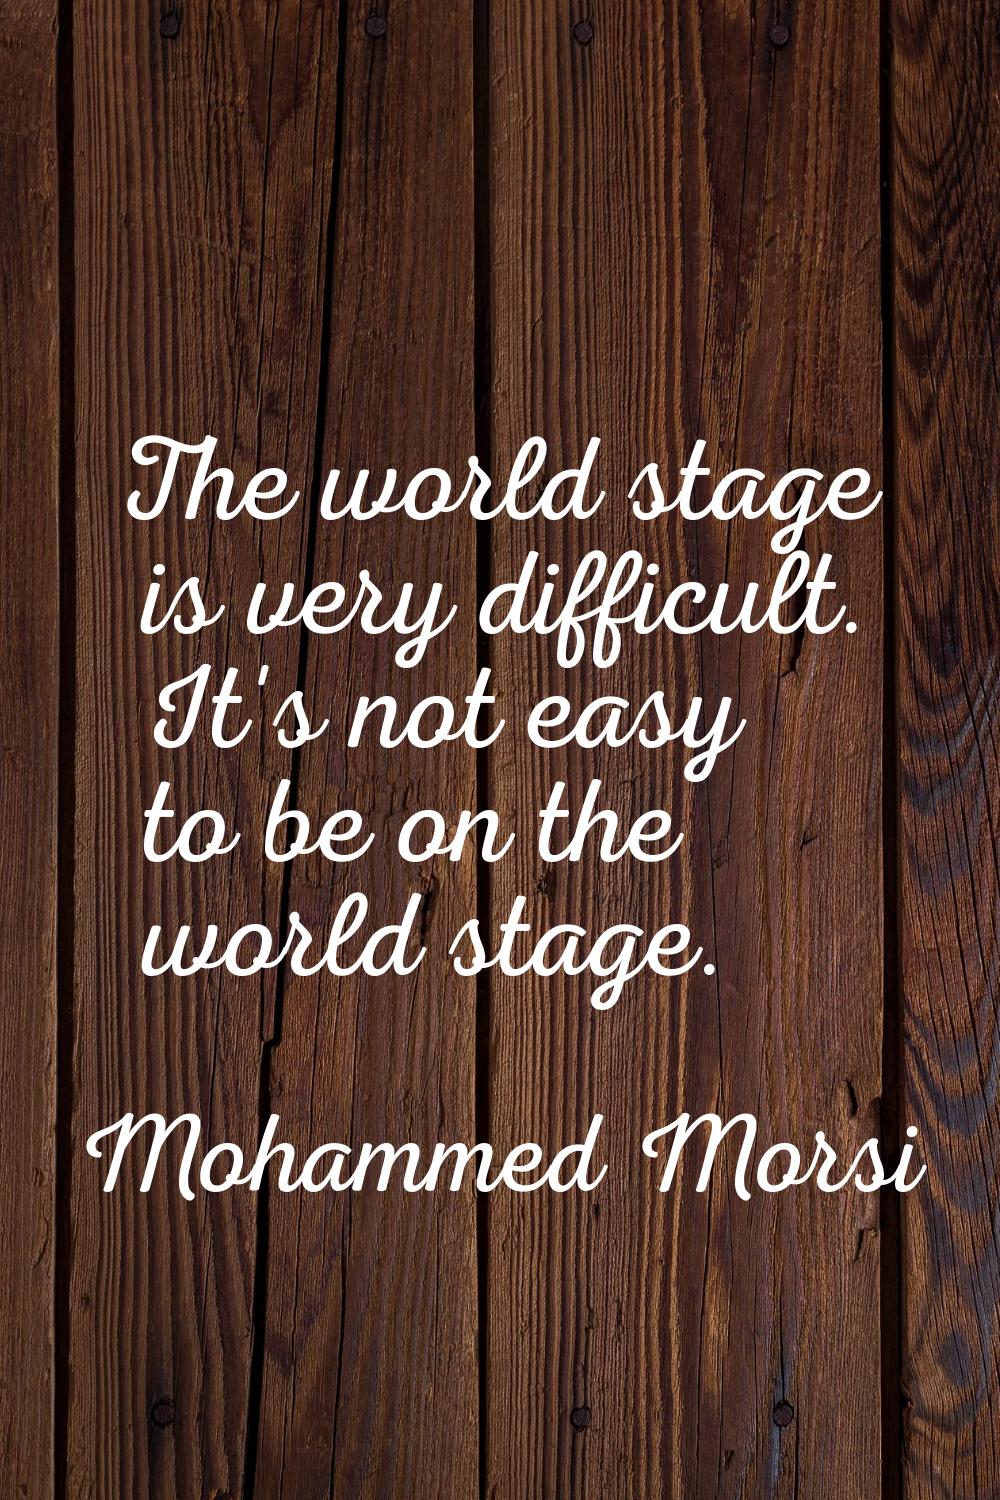 The world stage is very difficult. It's not easy to be on the world stage.